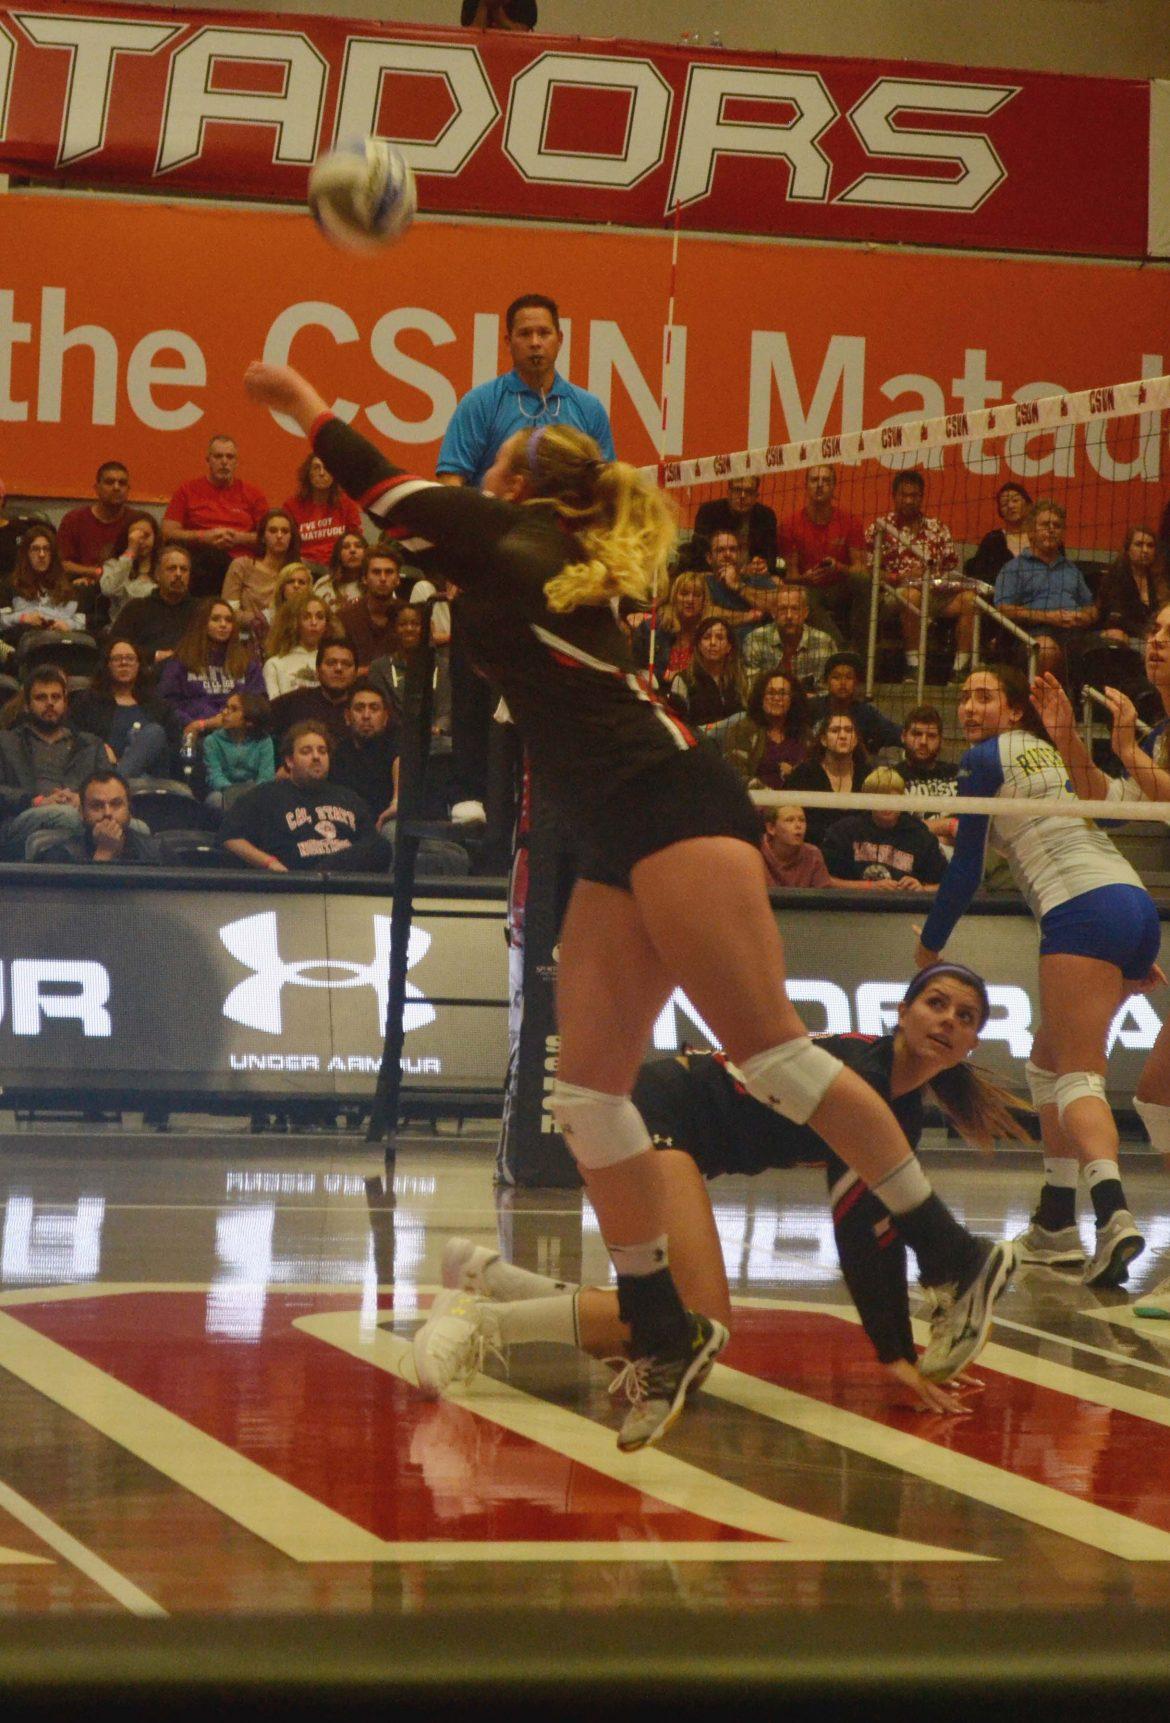 CSUN woman volleyball player in action hitting a ball